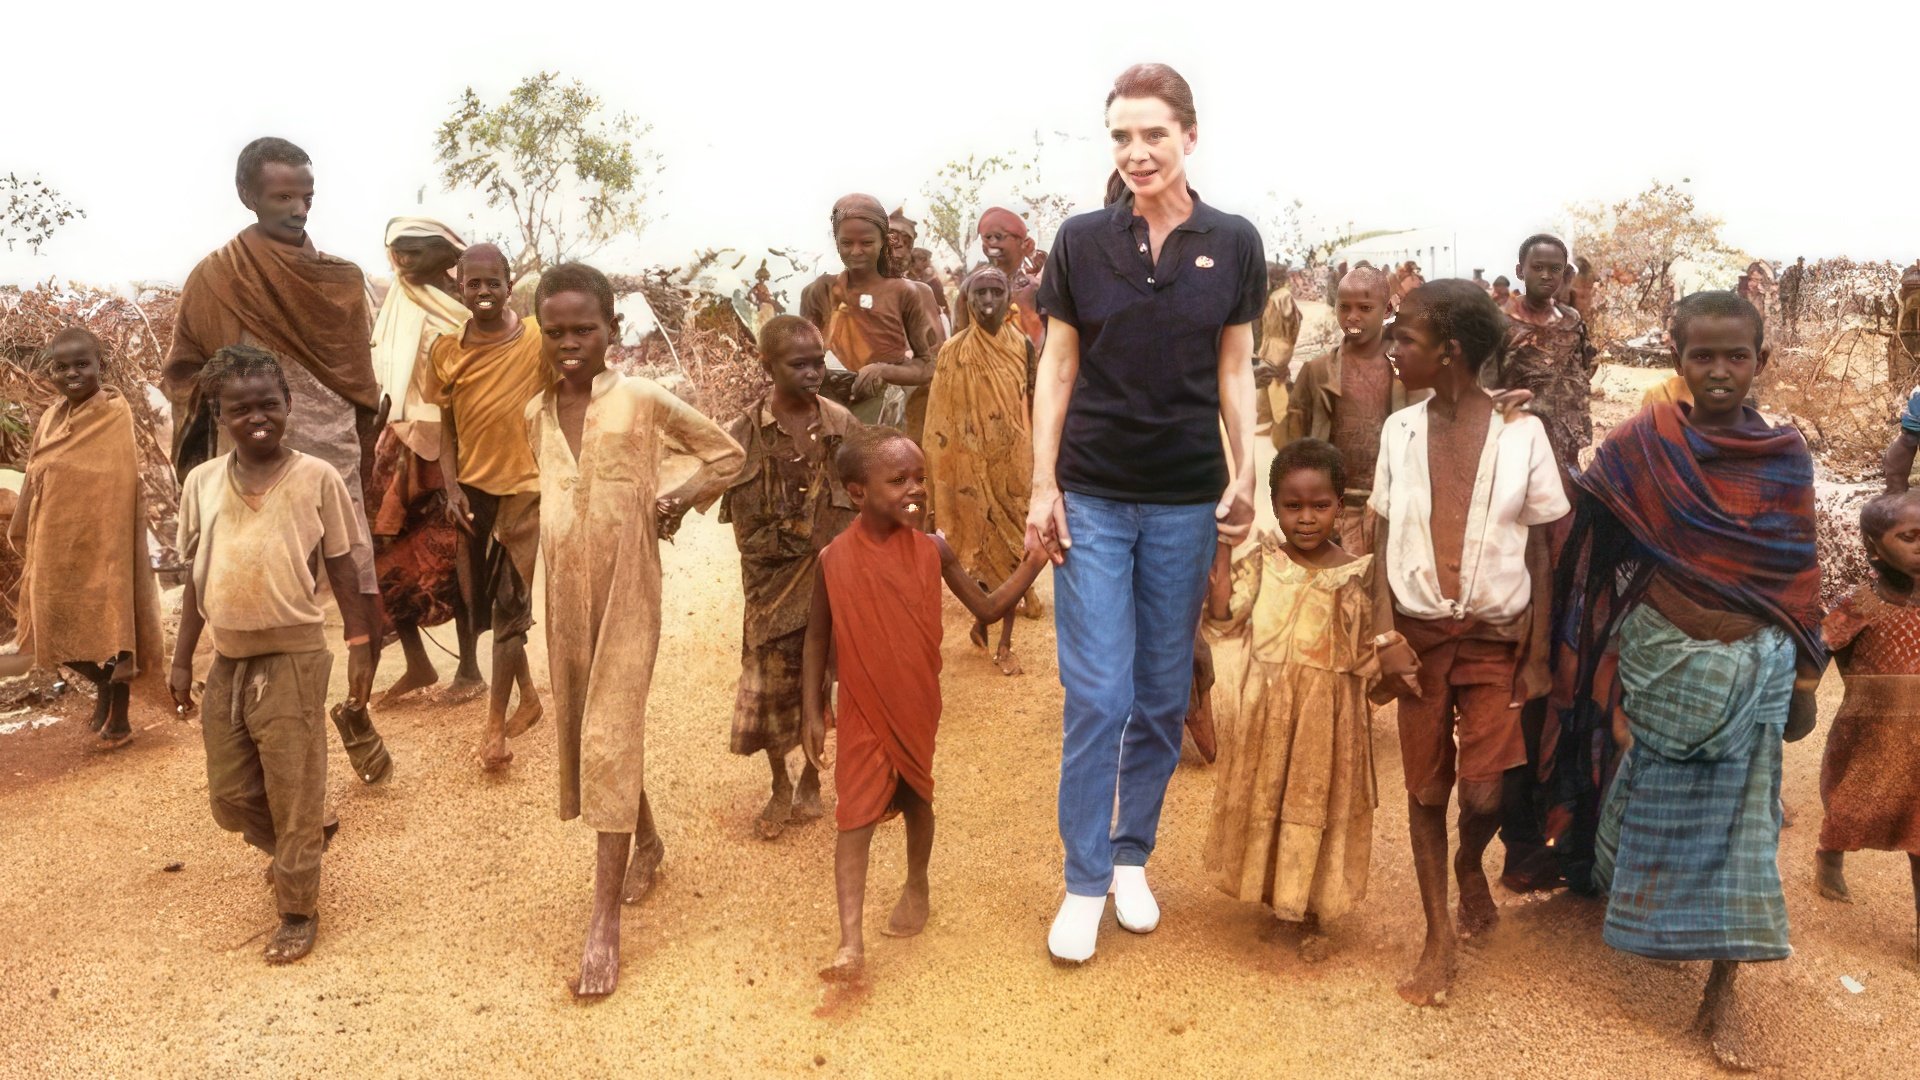 In the 70s, Audrey Hepburn turned to charity work instead of her acting career